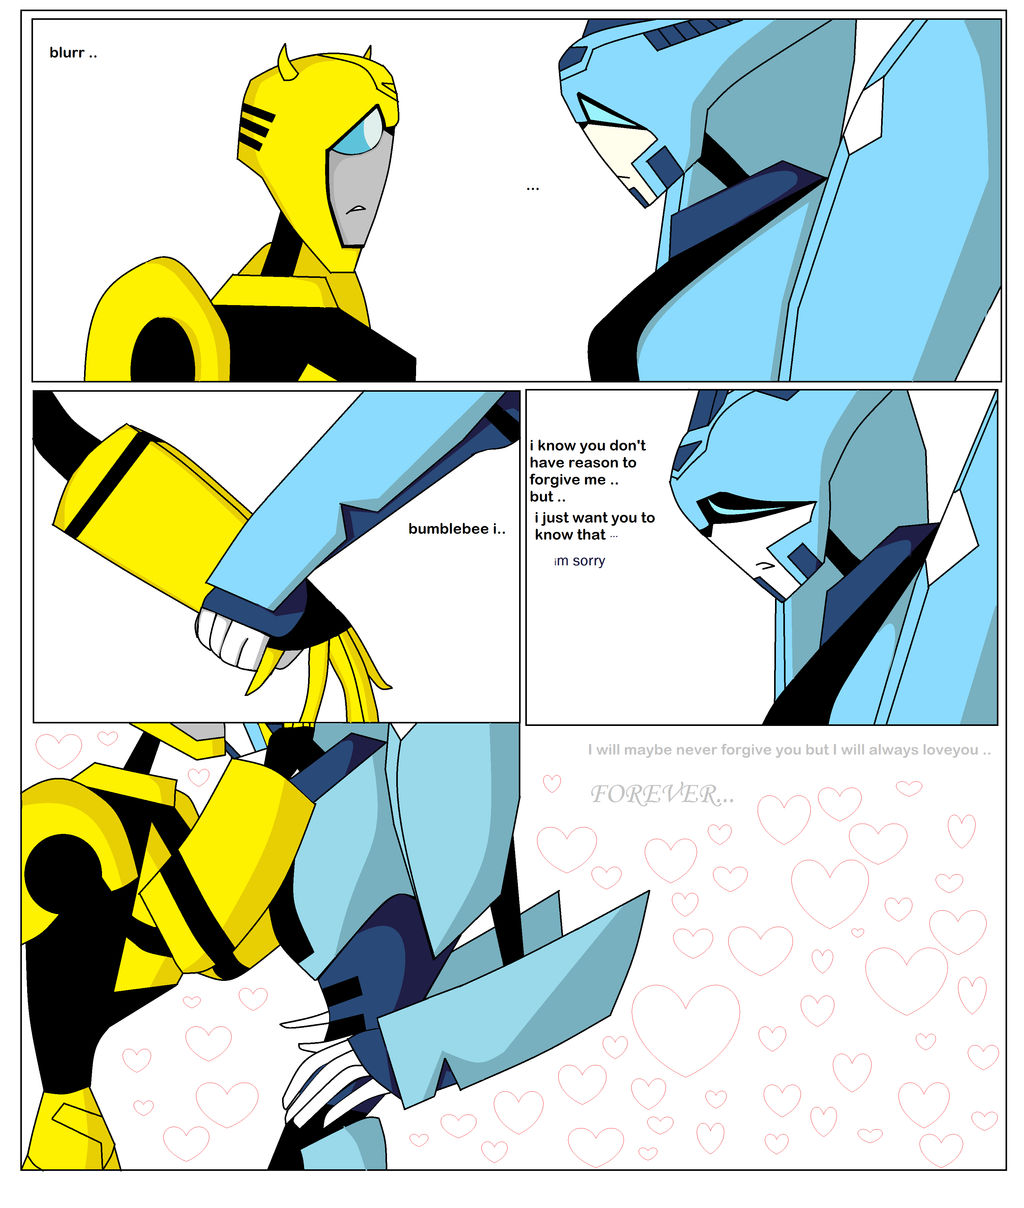 Blurr And Bumblebee